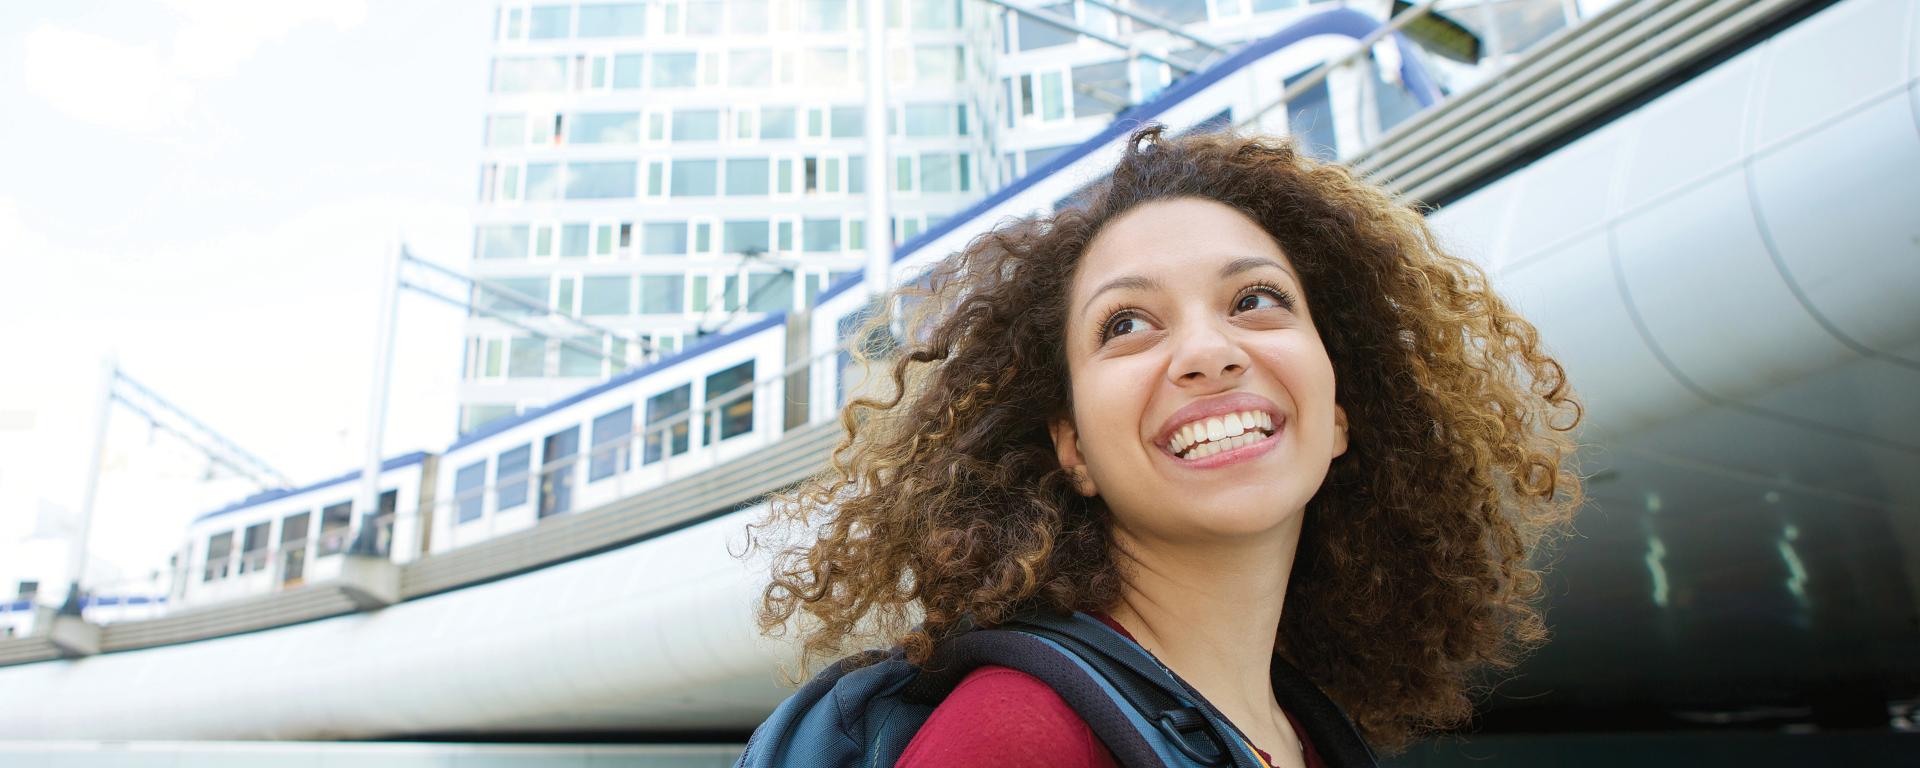 woman backpack smiling outside train station